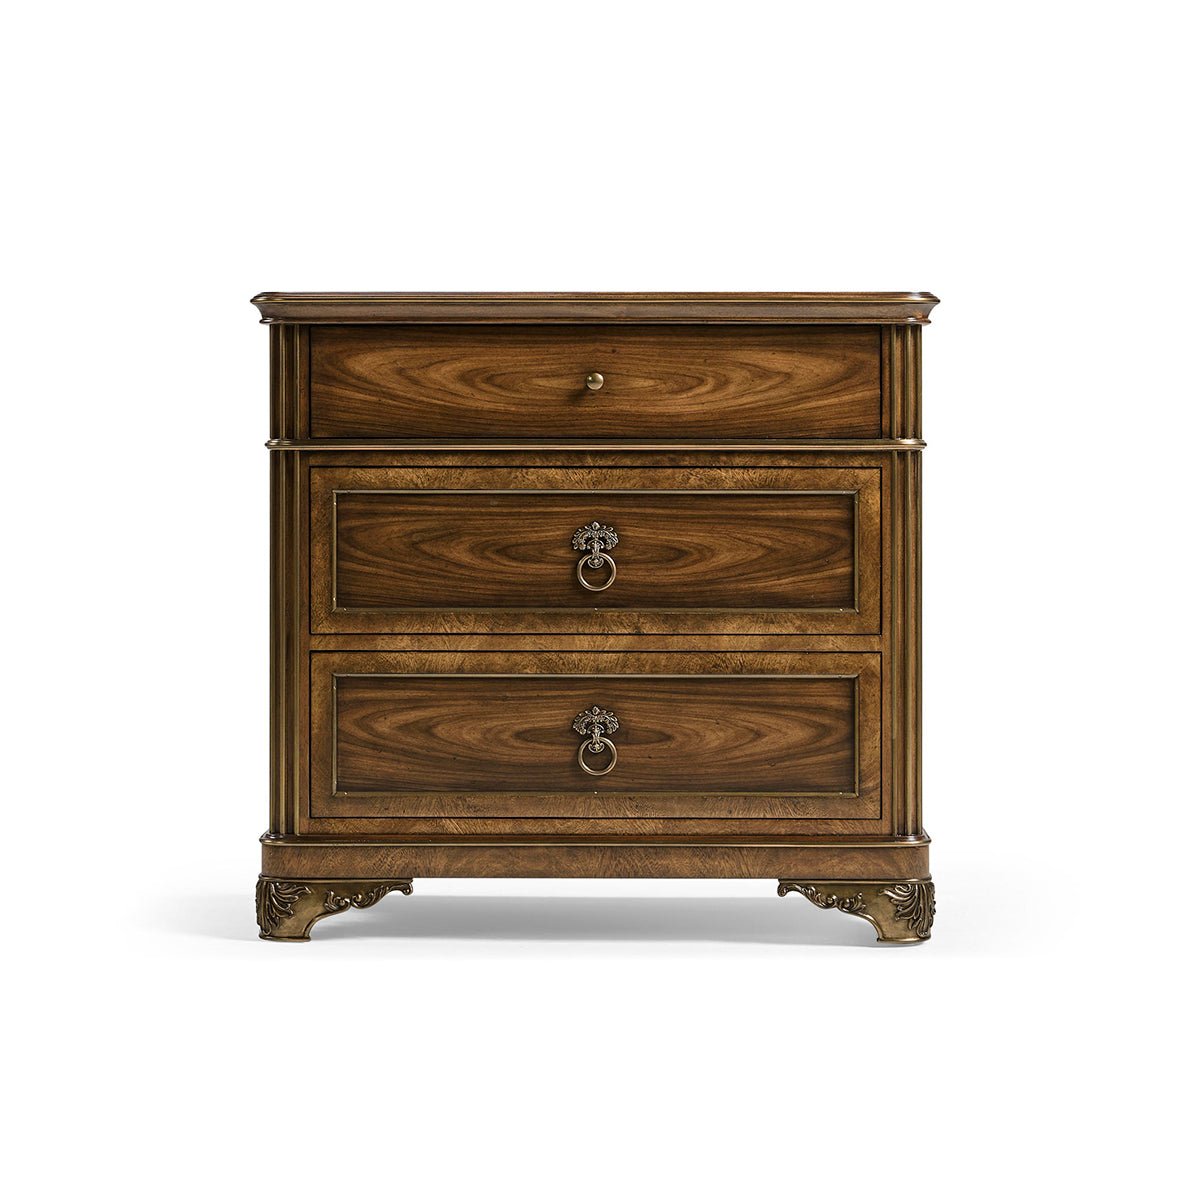 Neo Classic Inspired Bedside Chest - English Georgian America